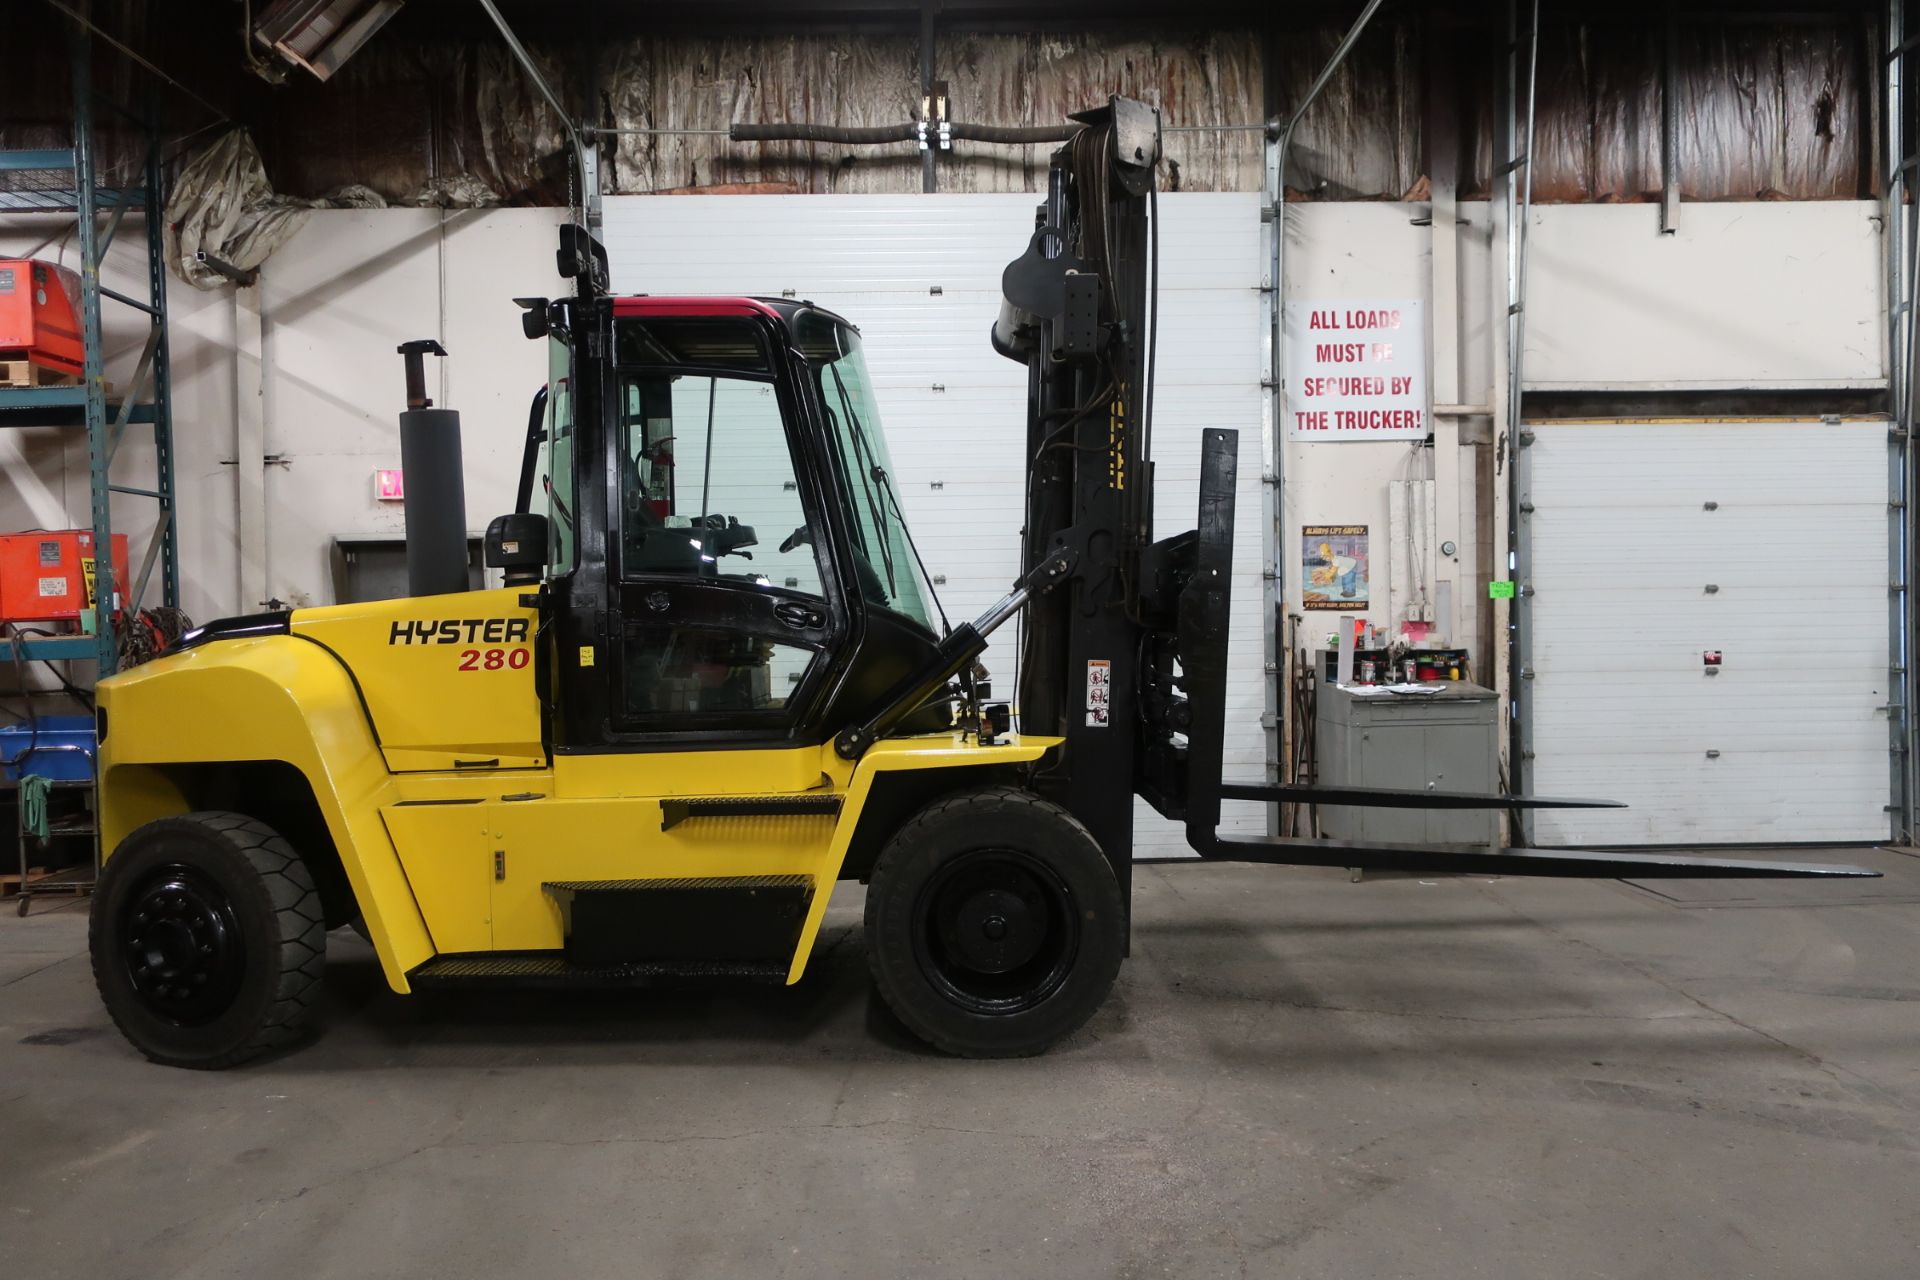 FREE CUSTOMS - 2013 Hyster 28000lbs OUTDOOR Forklift with 8' FORKS Diesel with Fork Positioner